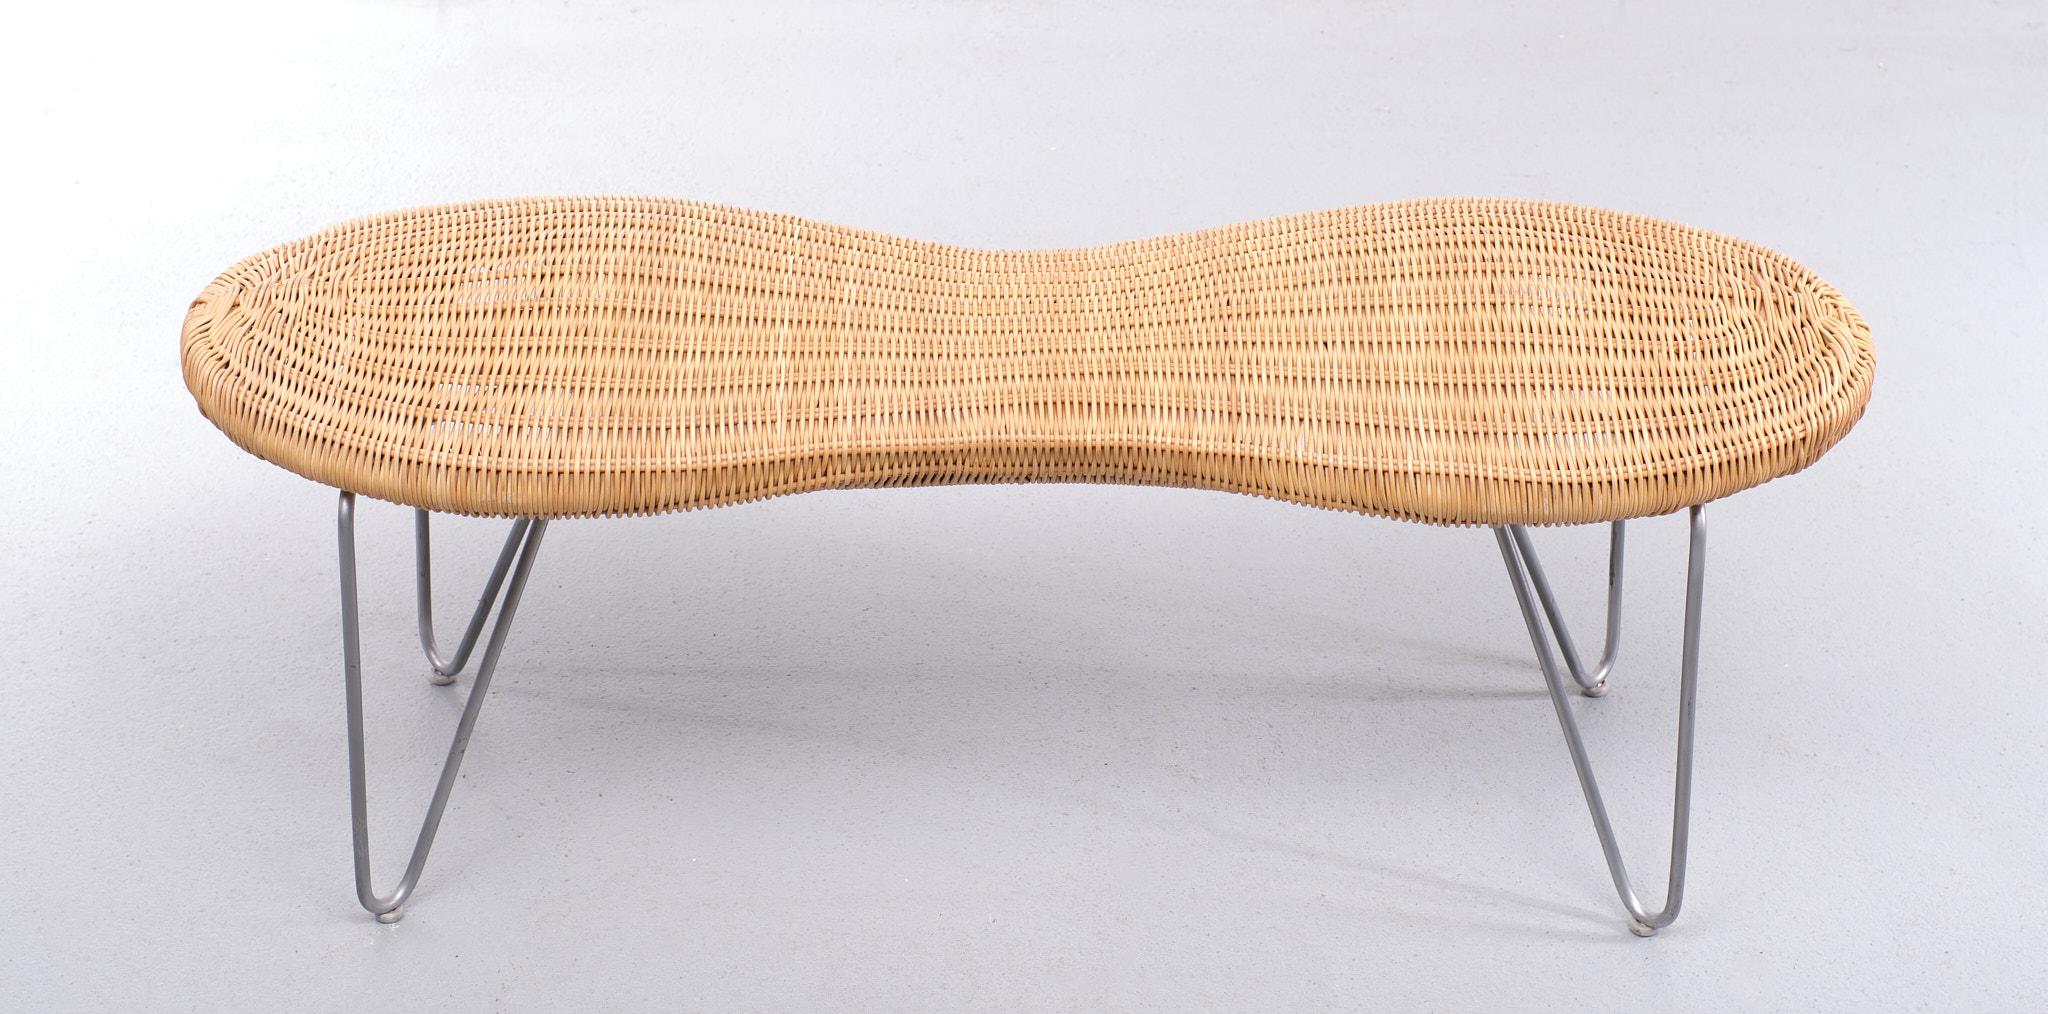 Love this Wicker Peanut stool . Made for Ikea in the 1980s  Very rare bench . 
Metal u shaped folding legs . Comes with a organic Wicker top . With  the shape  
of a Peanut . Great looking piece . 